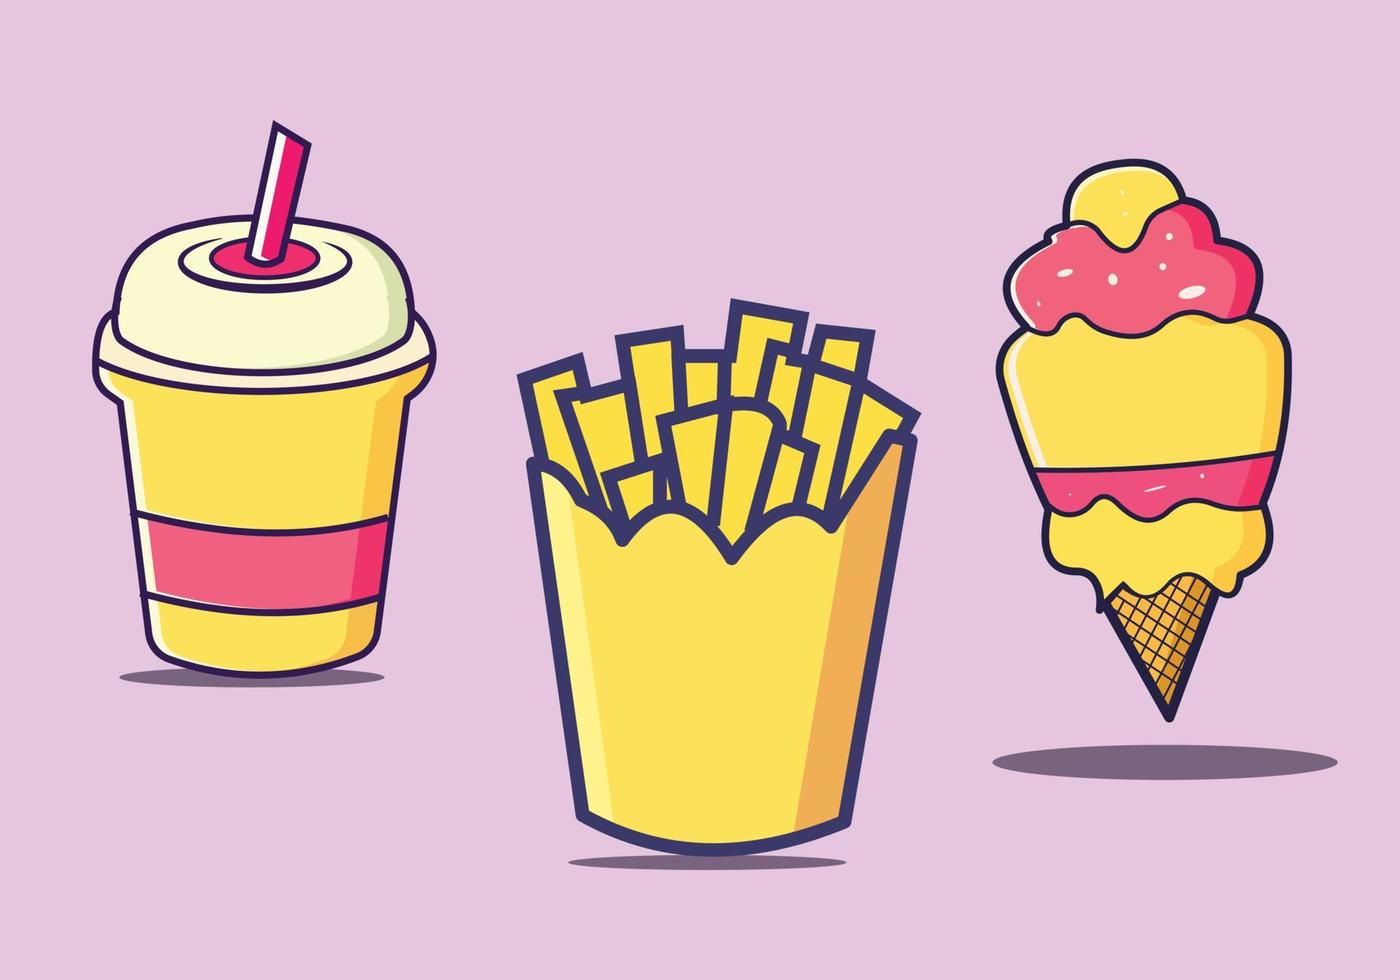 Fast food iteam vector illustration.ice cream cone,cold coffee,french fries cartoon.